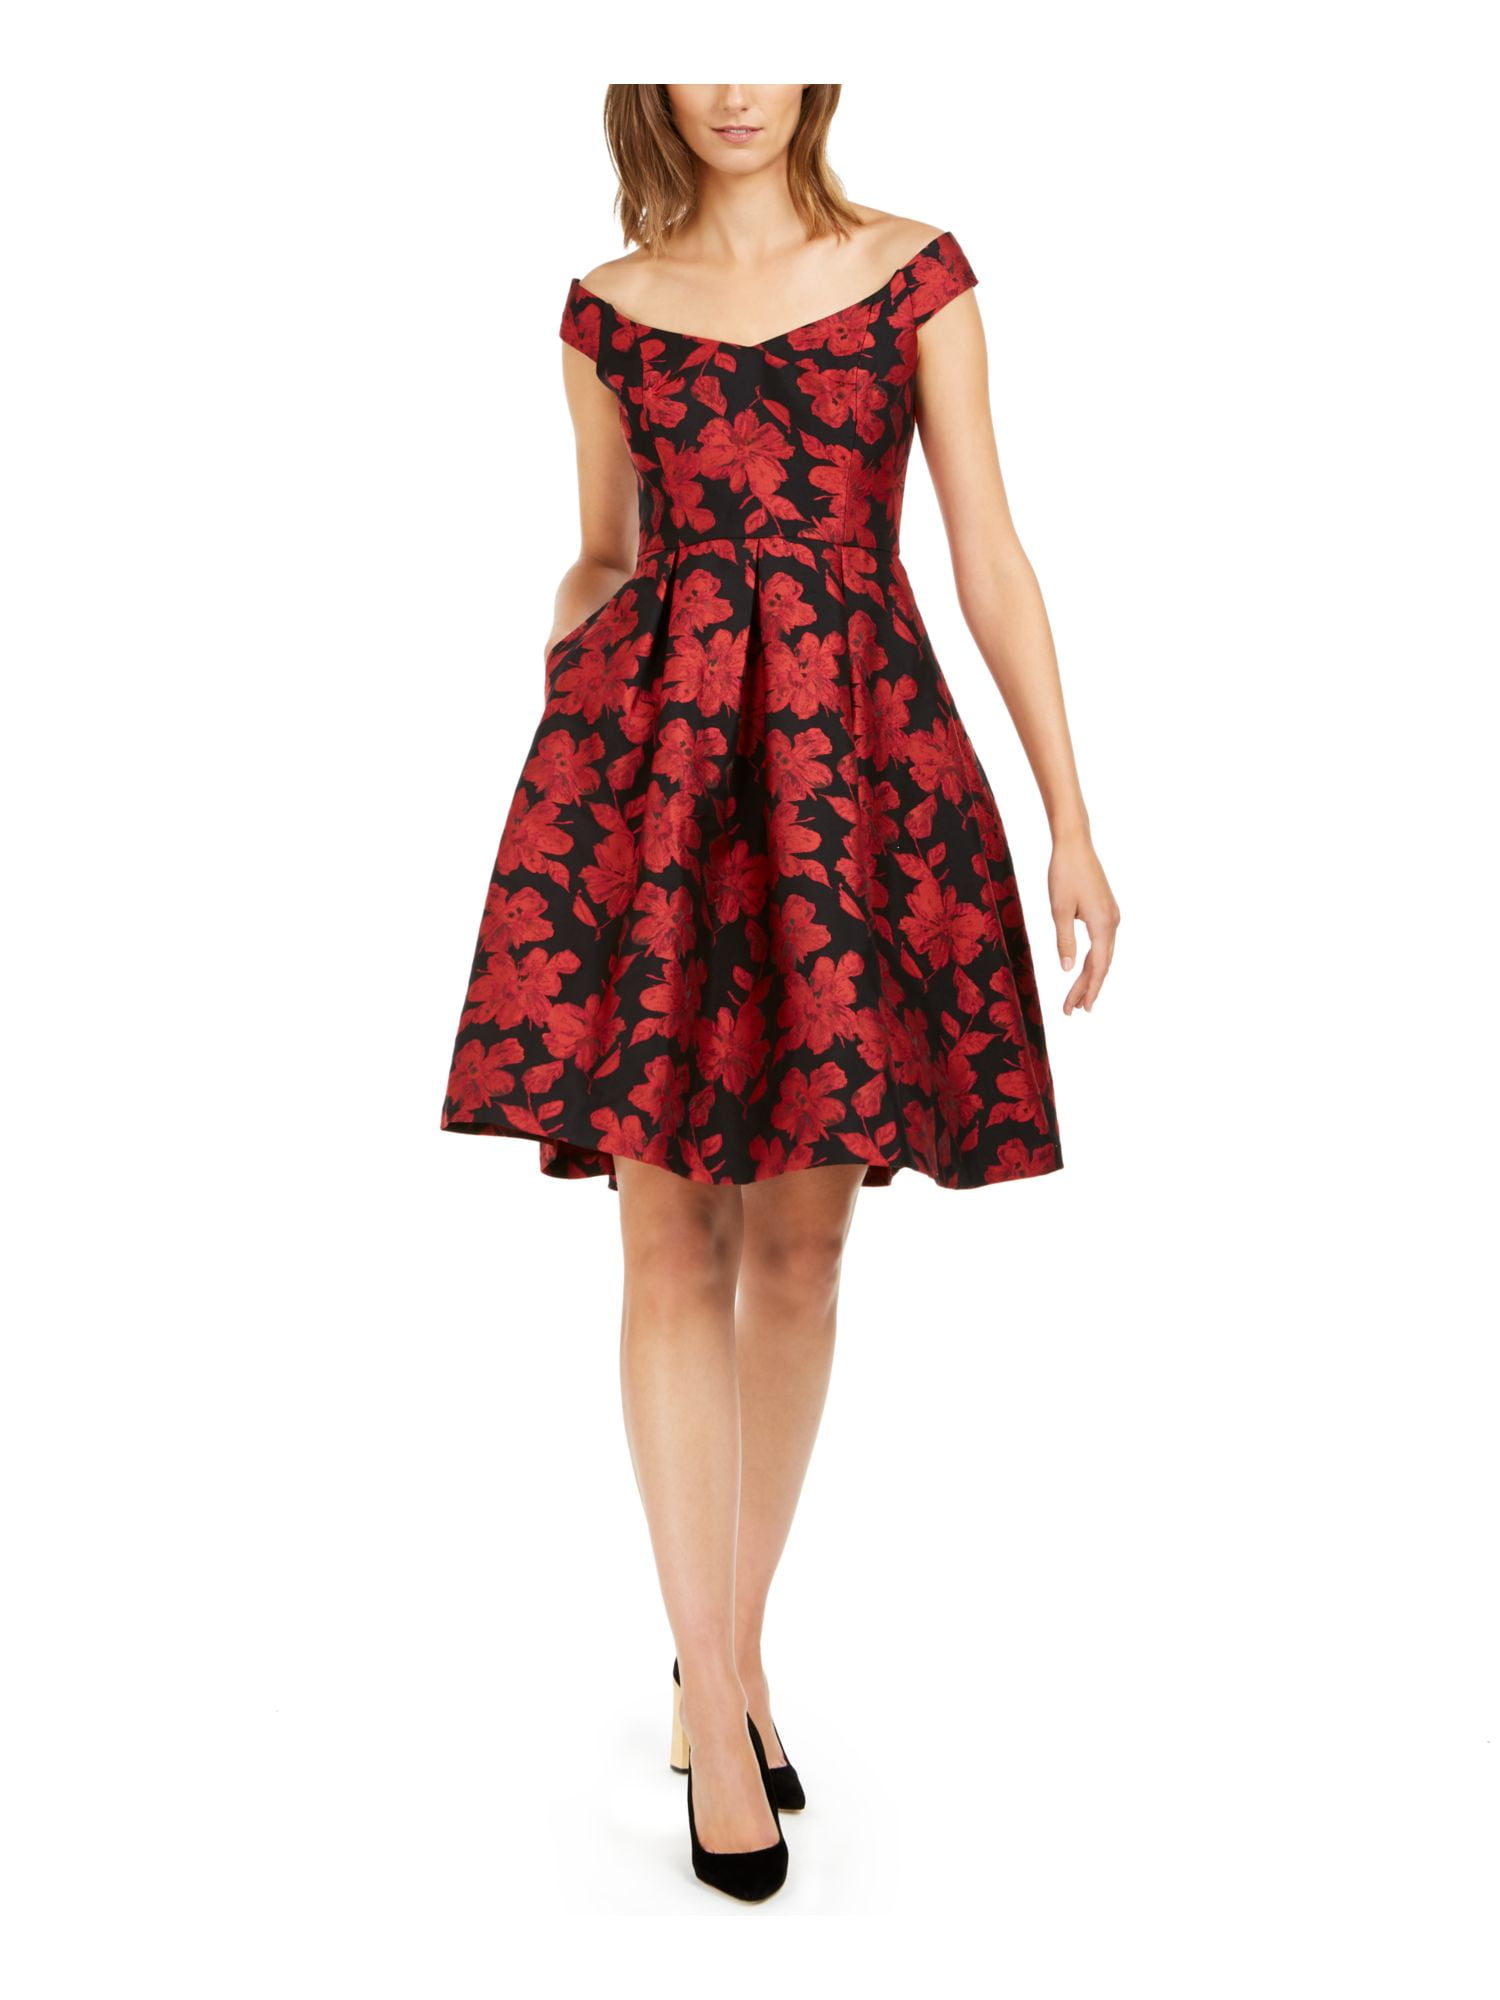 GUESS Womens Floral Print Off The Shoulder Bell Sleeve Party Dress 